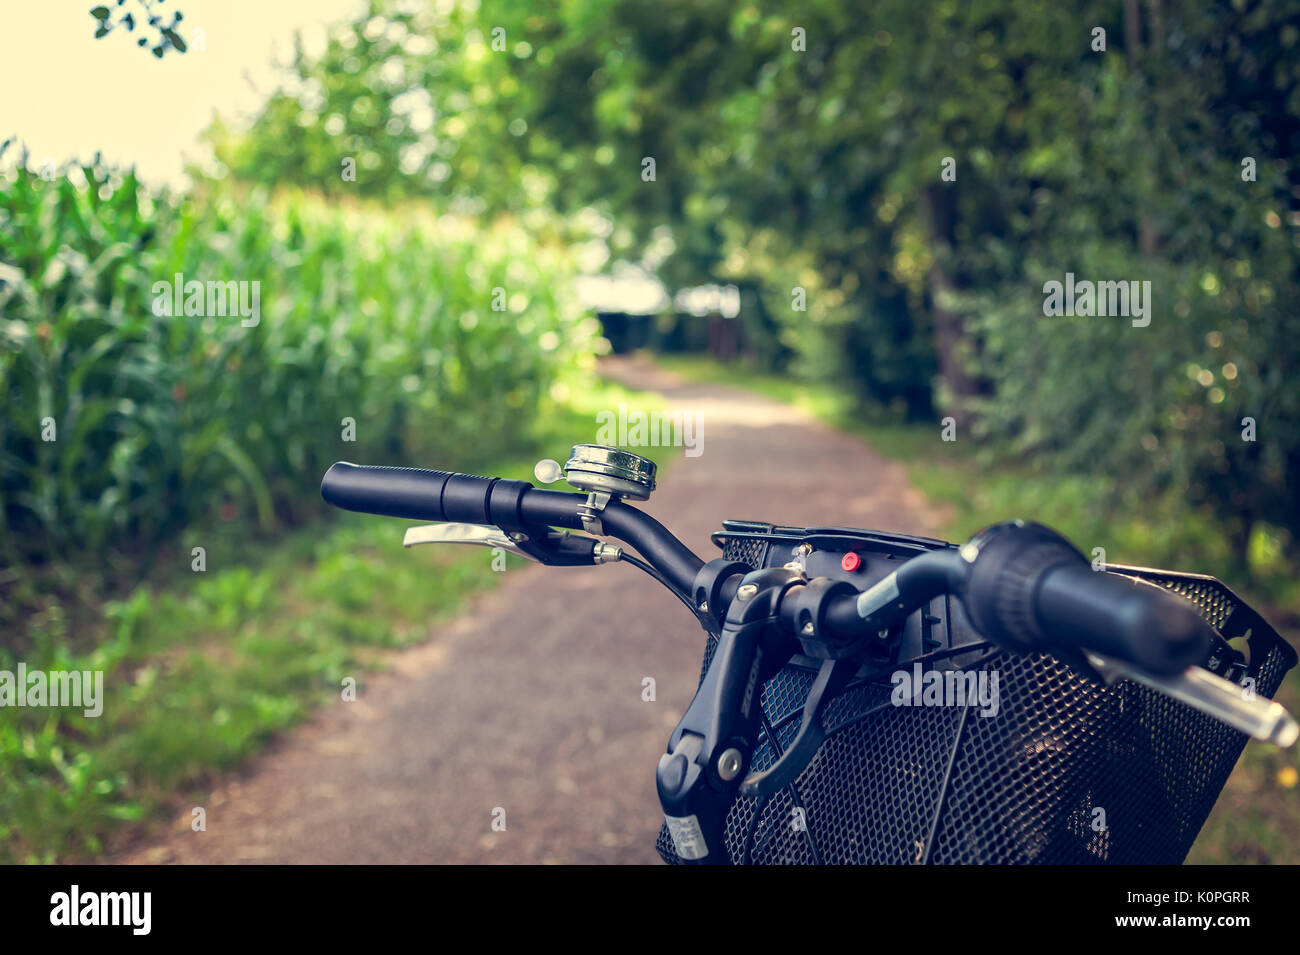 Bike path and bicycle handlebar close-up. Bicycle friendly city. Eco-friendly transport and healthy lifestyle concept. Stock Photo